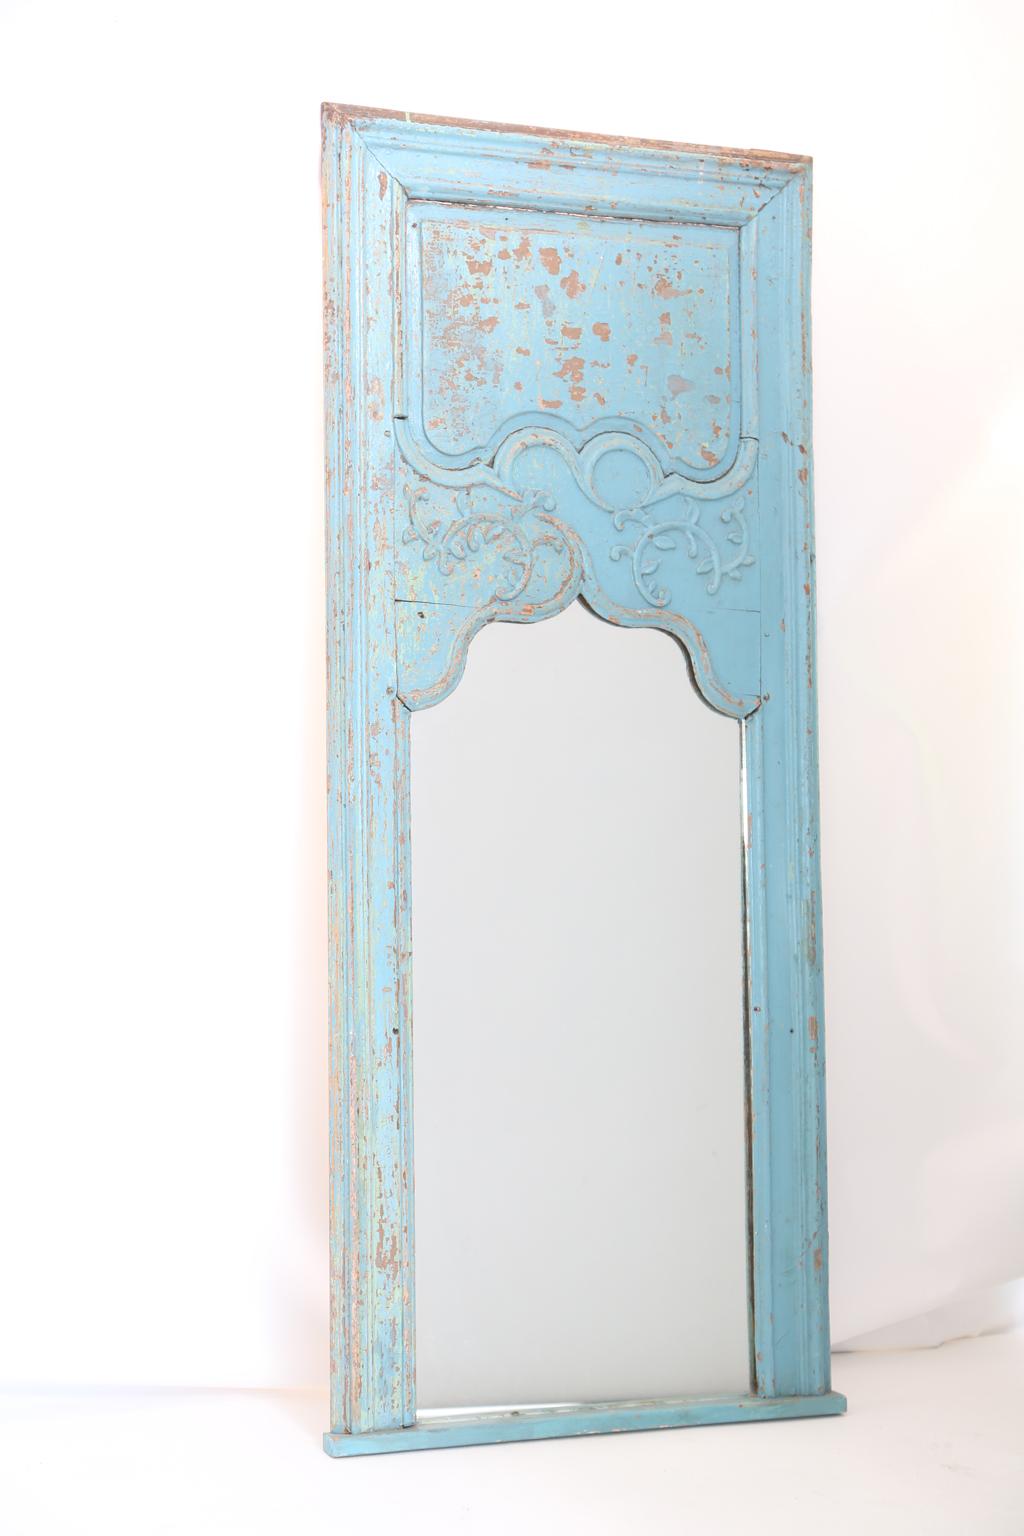 Painted Rococo trumeau mirror, having a painted finish showing desirable natural wear, its raised and fielded frame, surrounding foliate scrolls and a shaped mirrorplate. 

Stock ID: D2498.